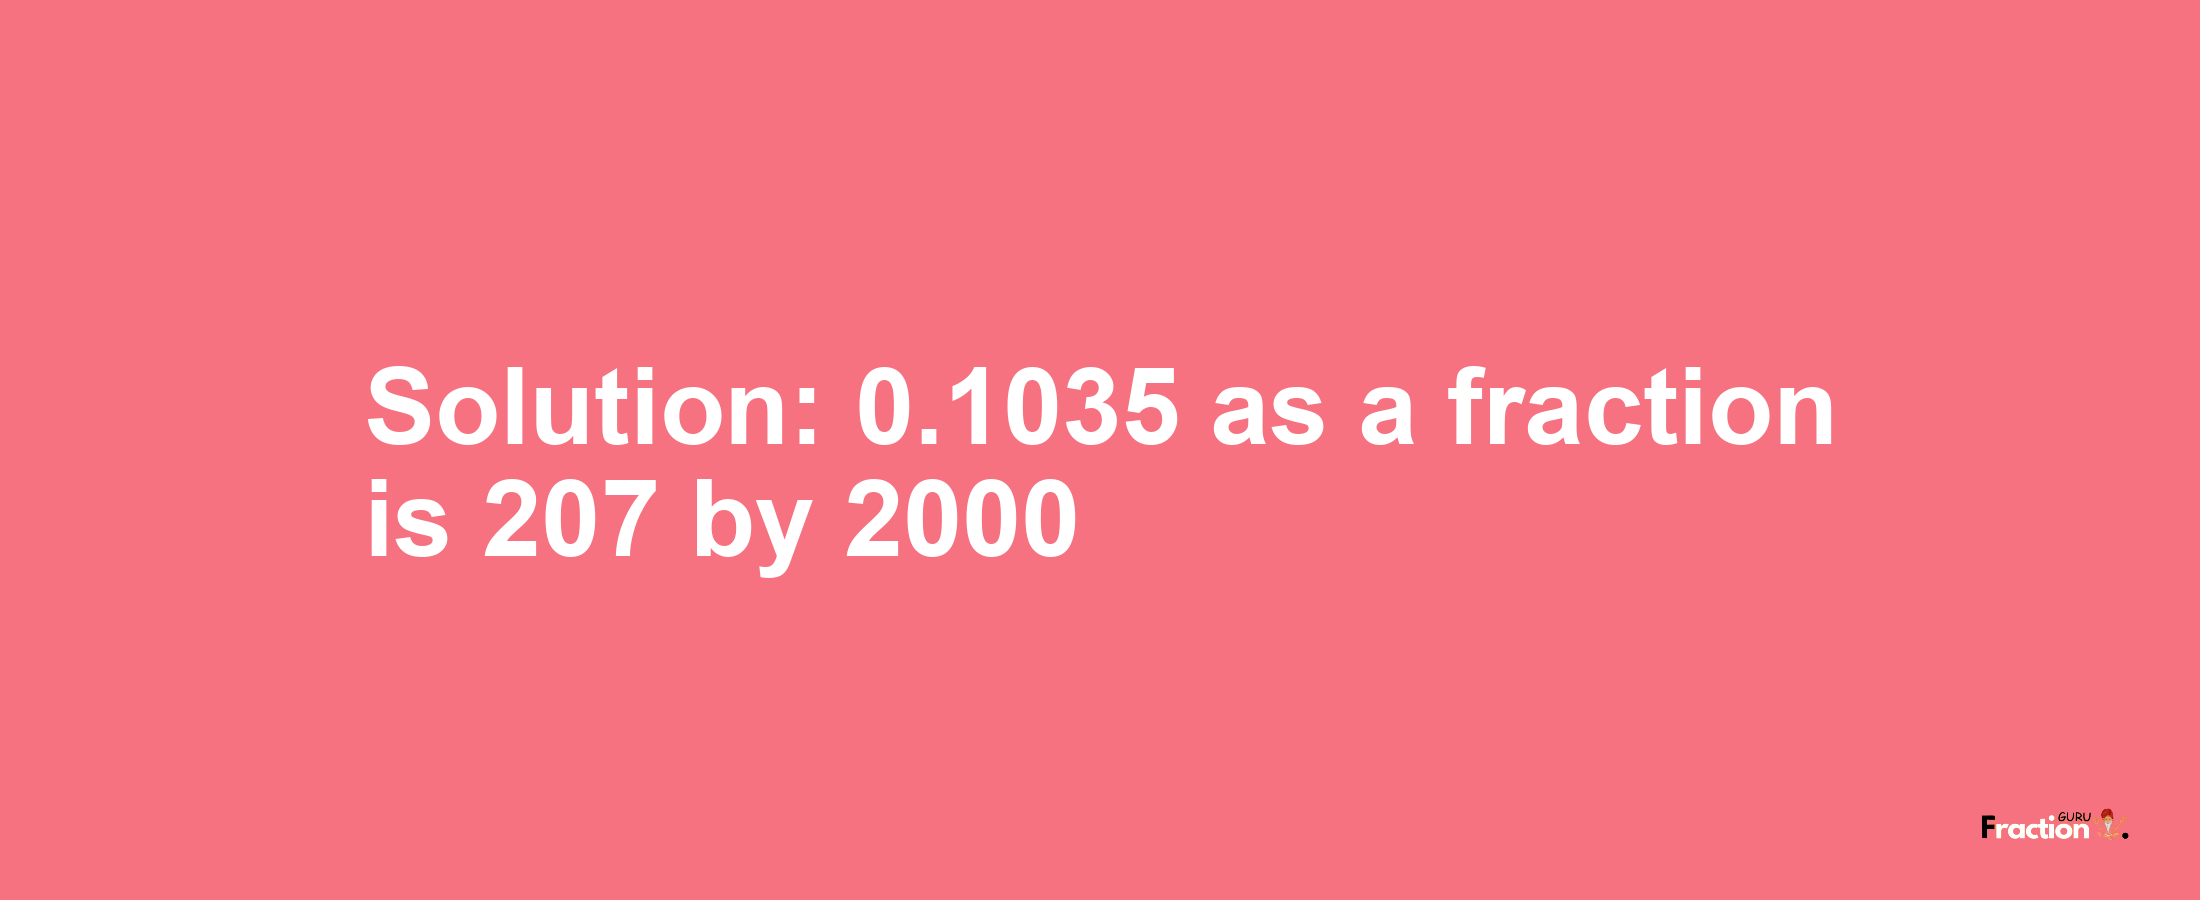 Solution:0.1035 as a fraction is 207/2000